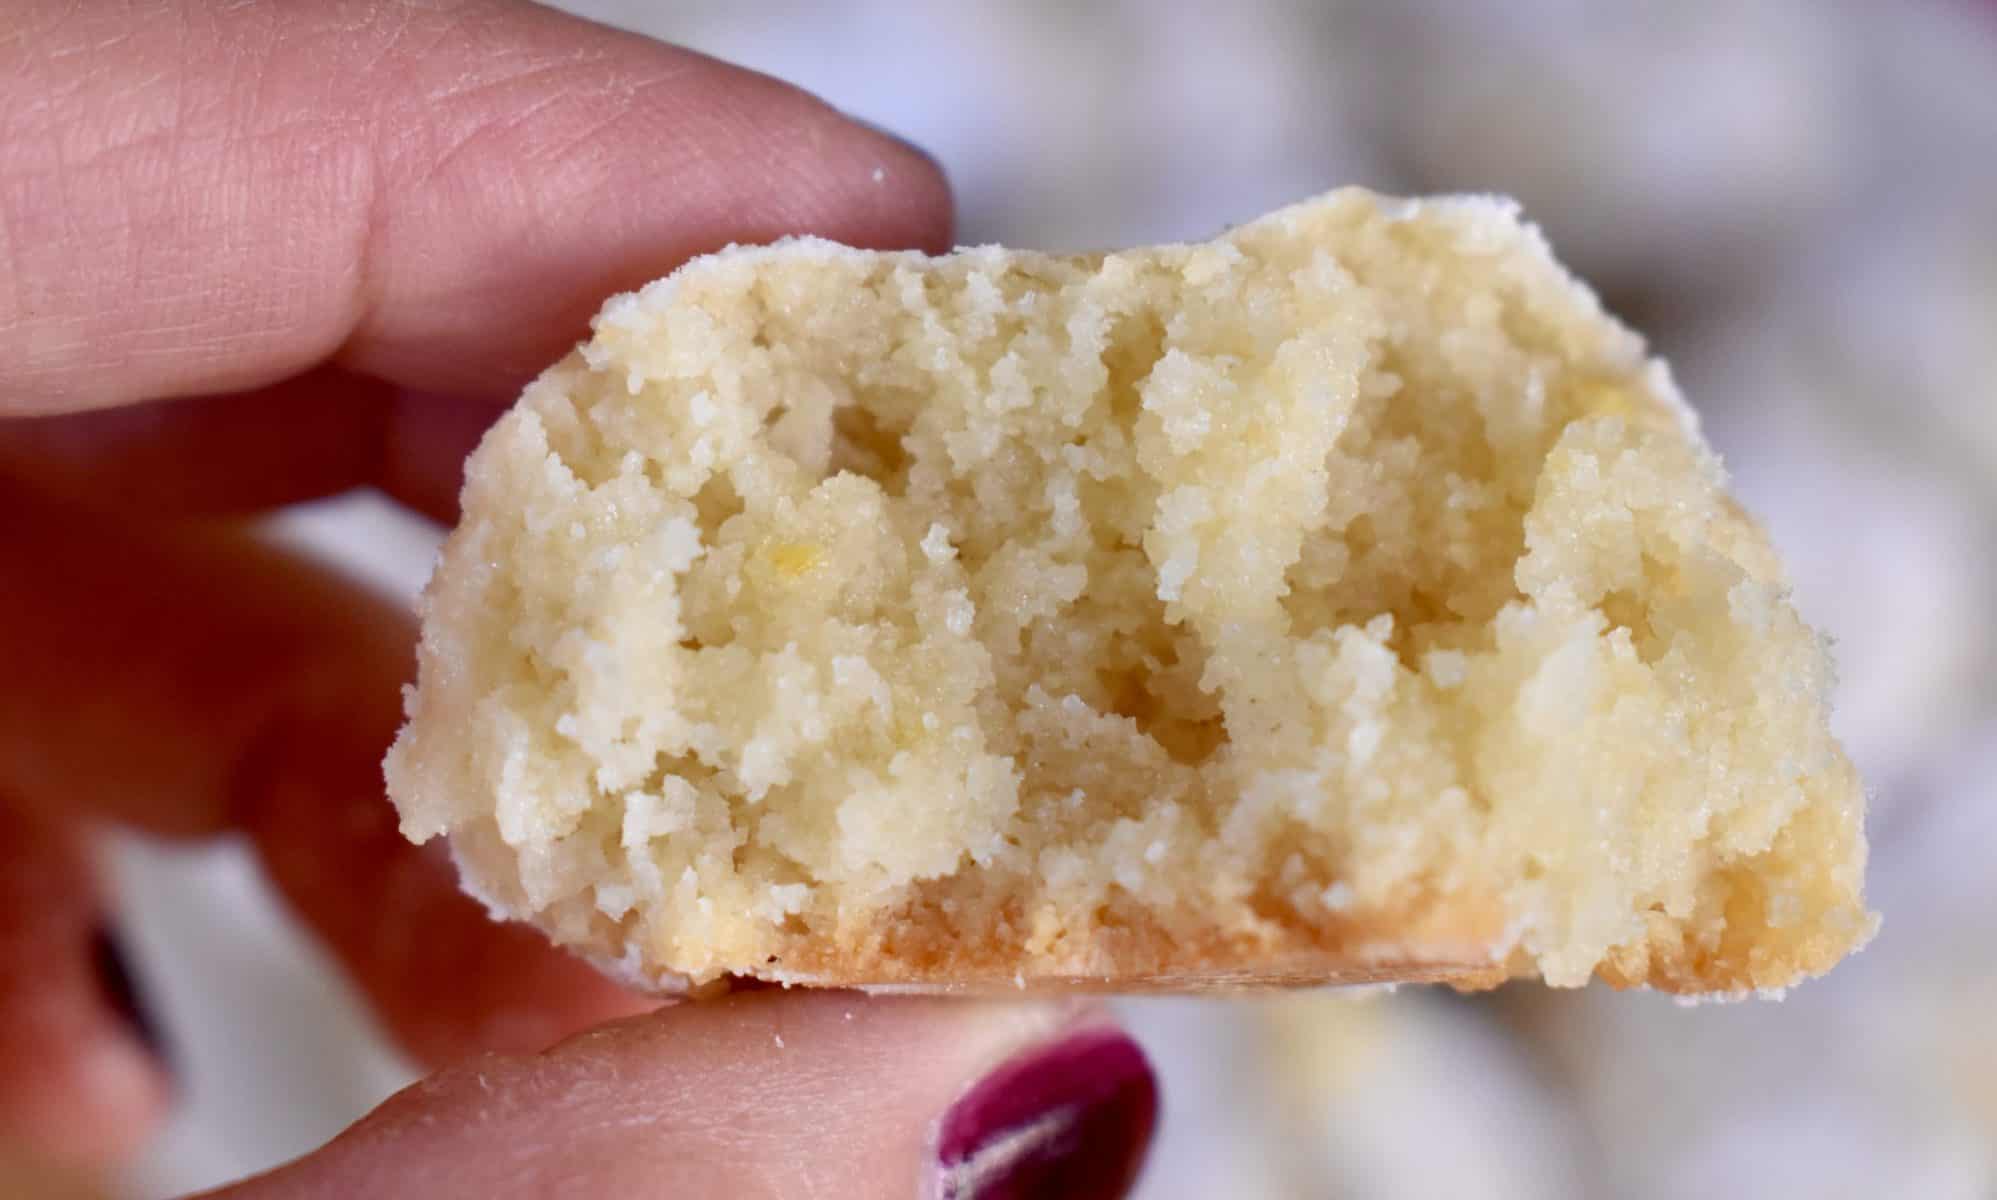 Close up of soft and chewy texture.